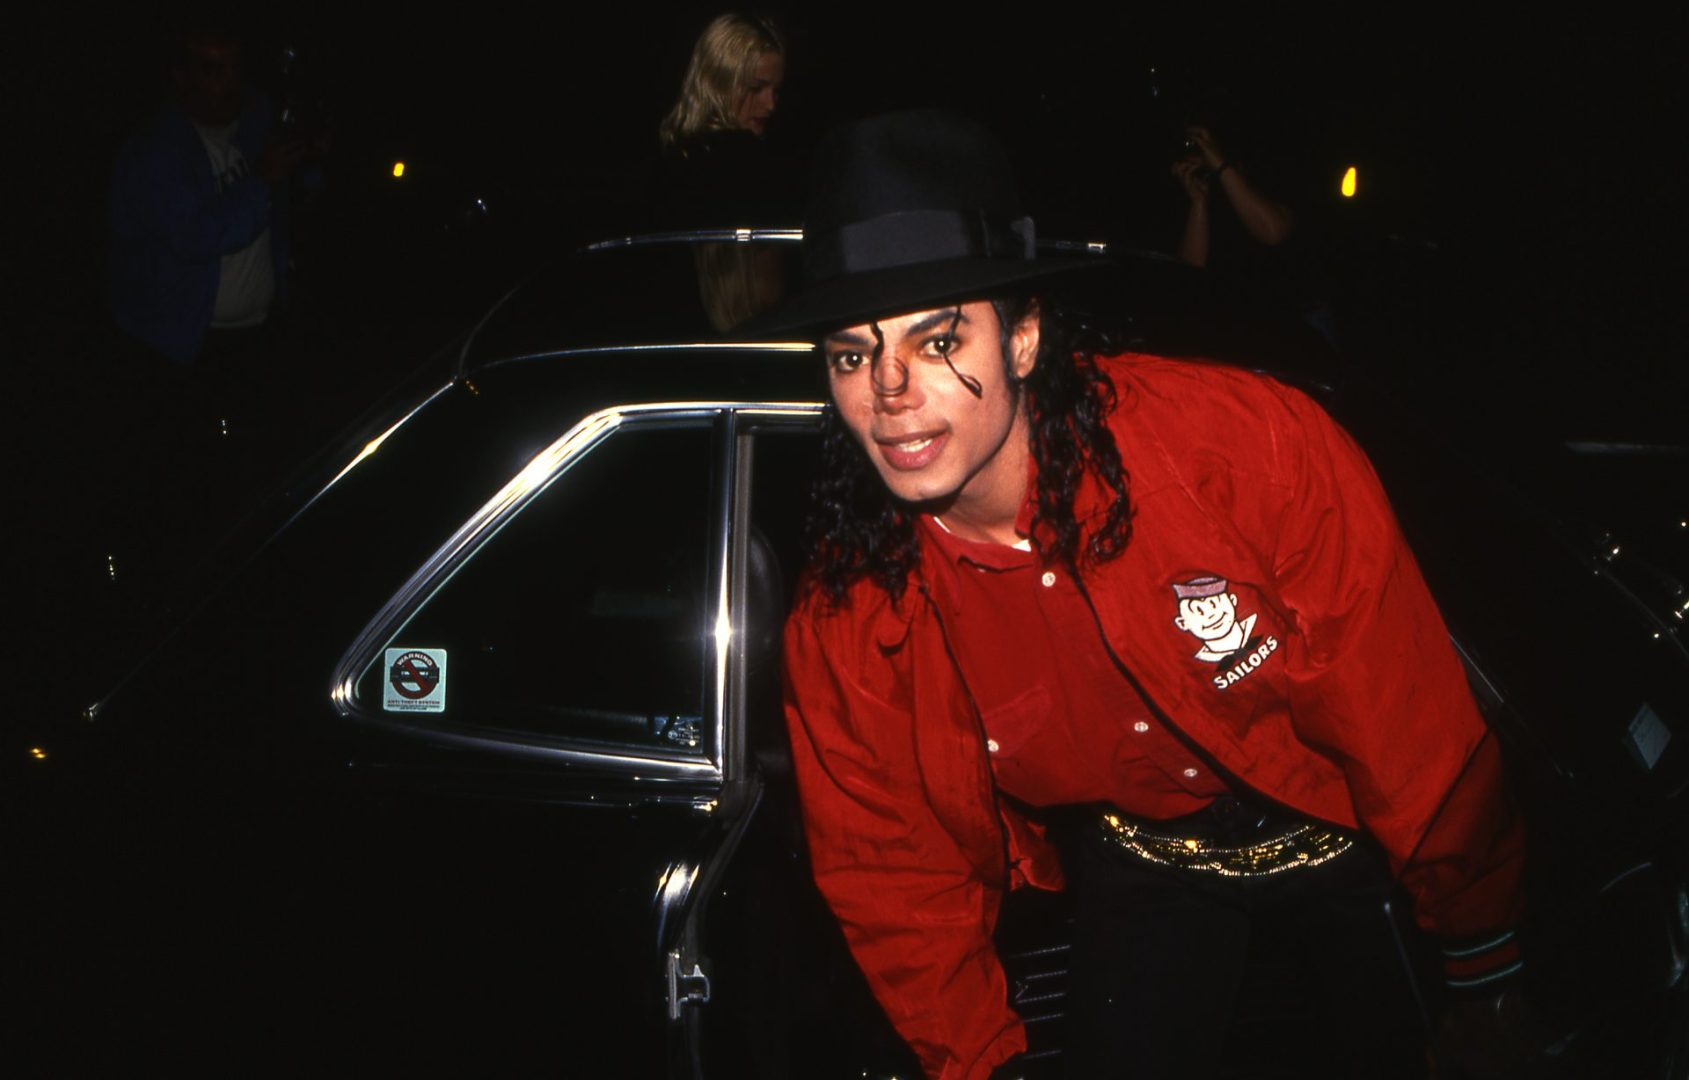 Michael Jackson's estate spent $6.5M to protect pop star's family